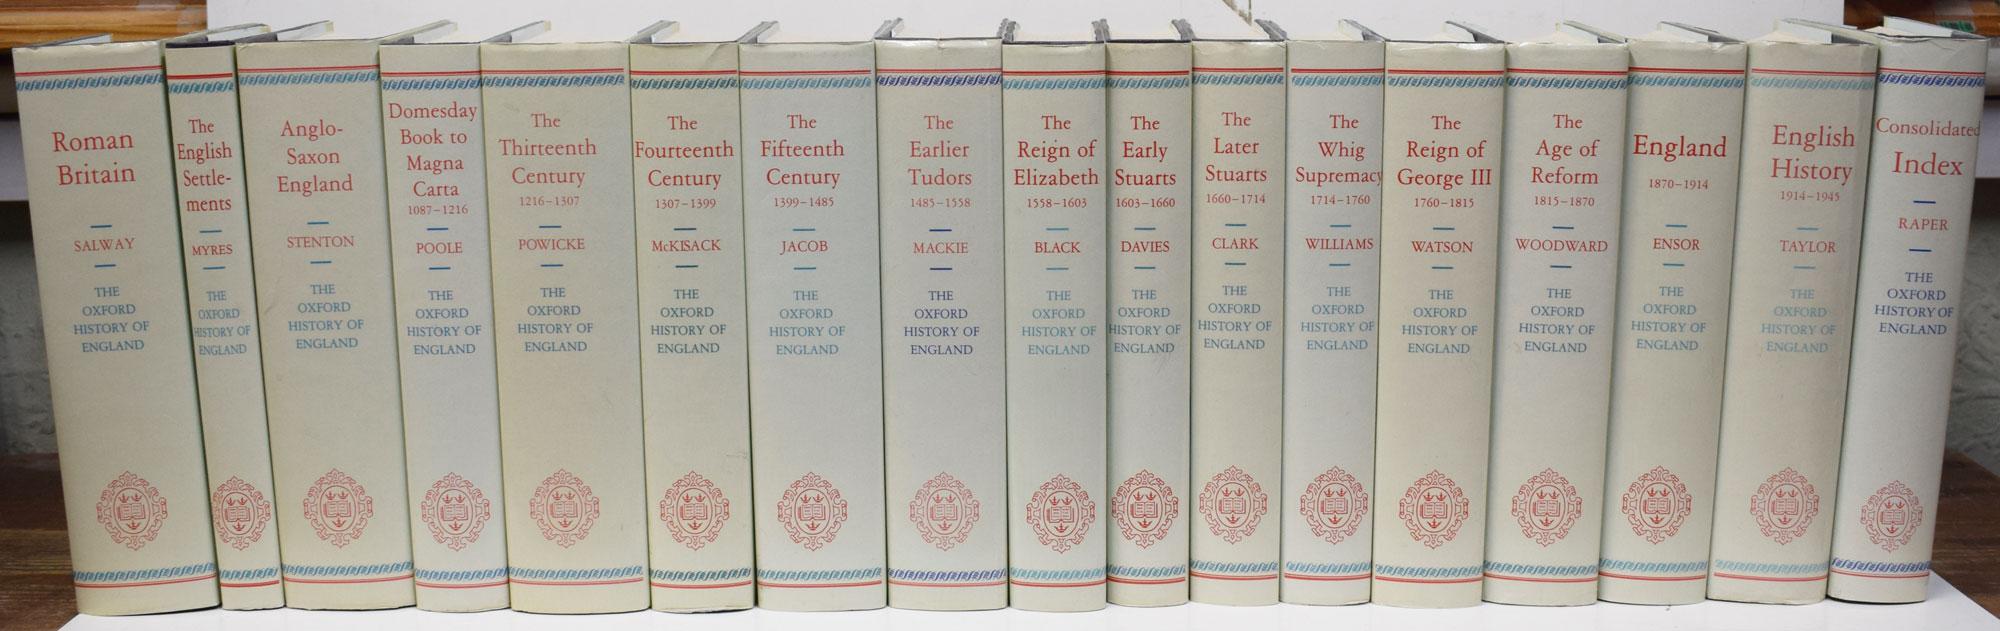 The Oxford History of England. Complete set of 17 volumes including General Index.